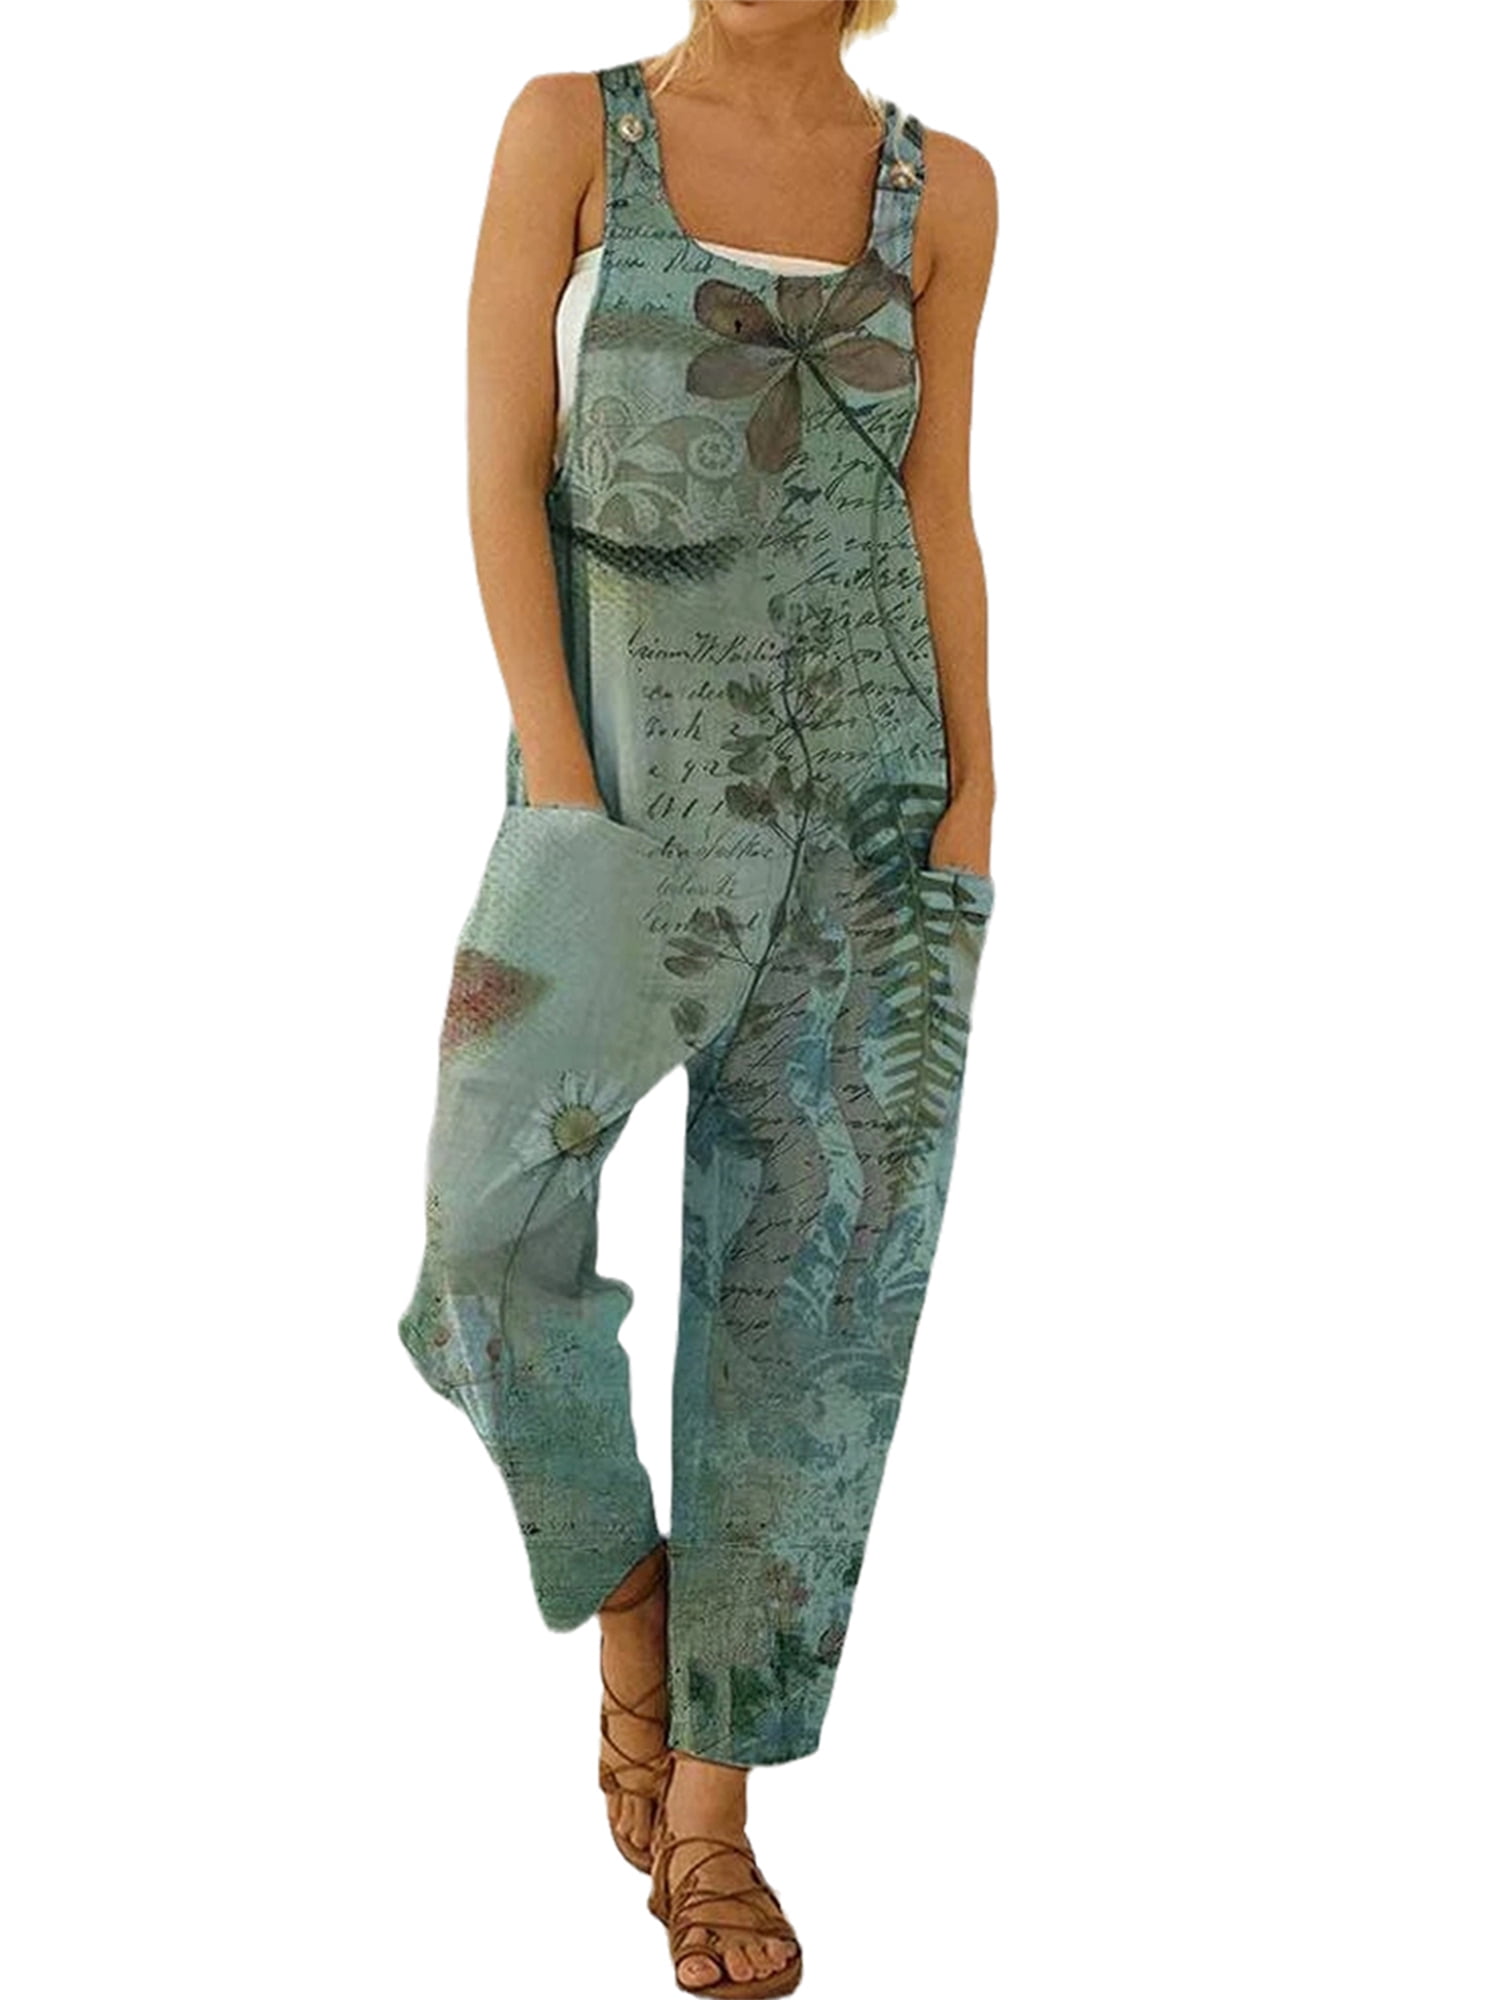 Womens Camo Sleeveless Jumpsuit Playsuit Ladies Boho Style Romper Overalls Size